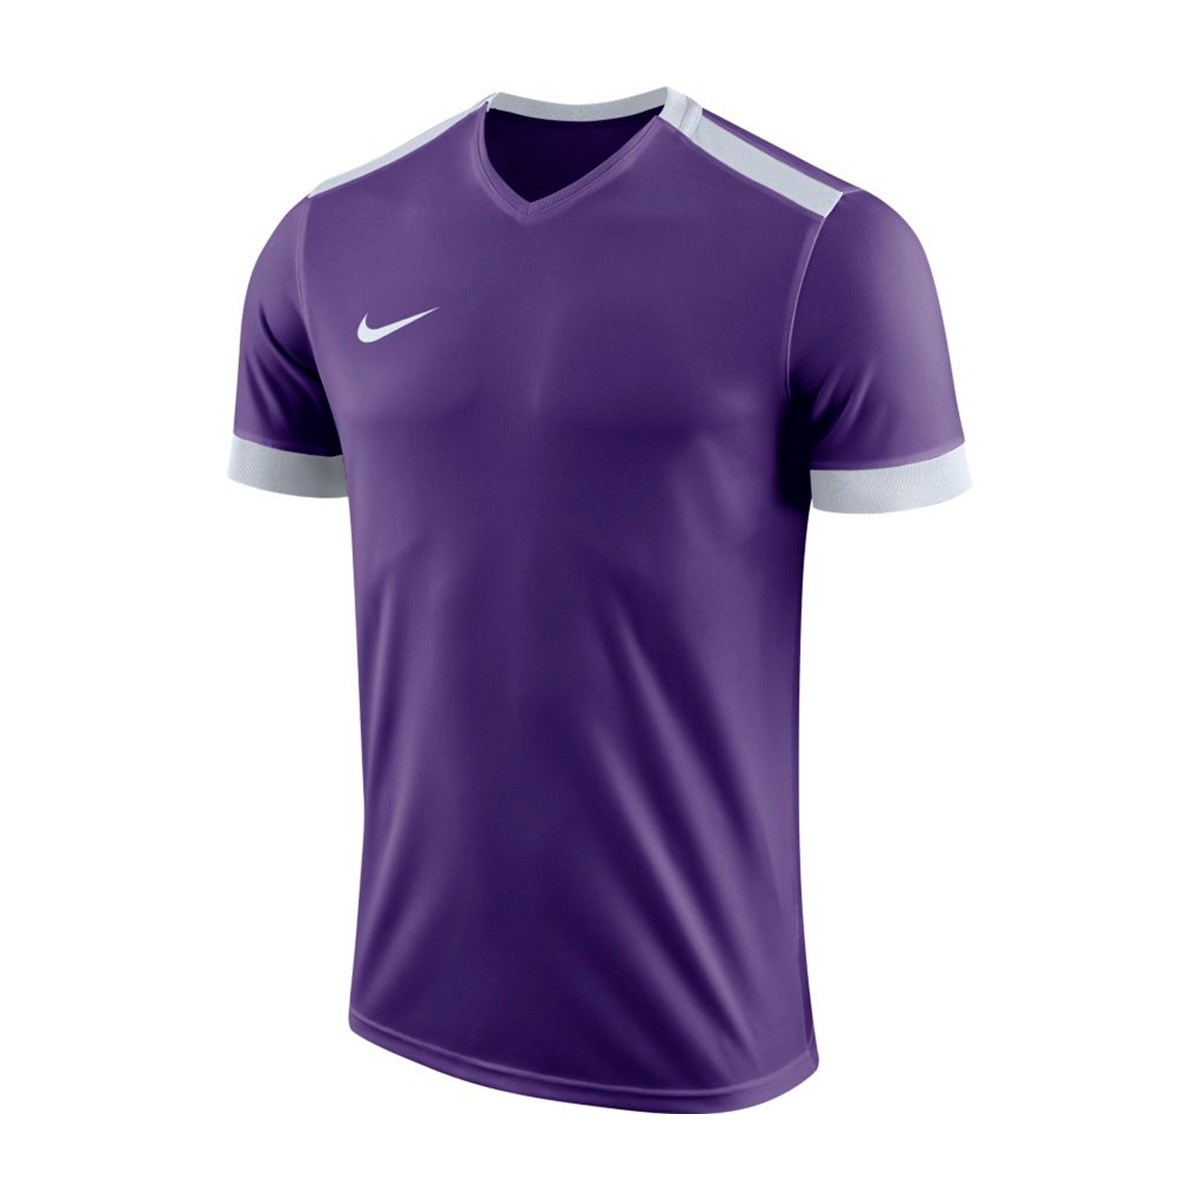 purple and white jersey